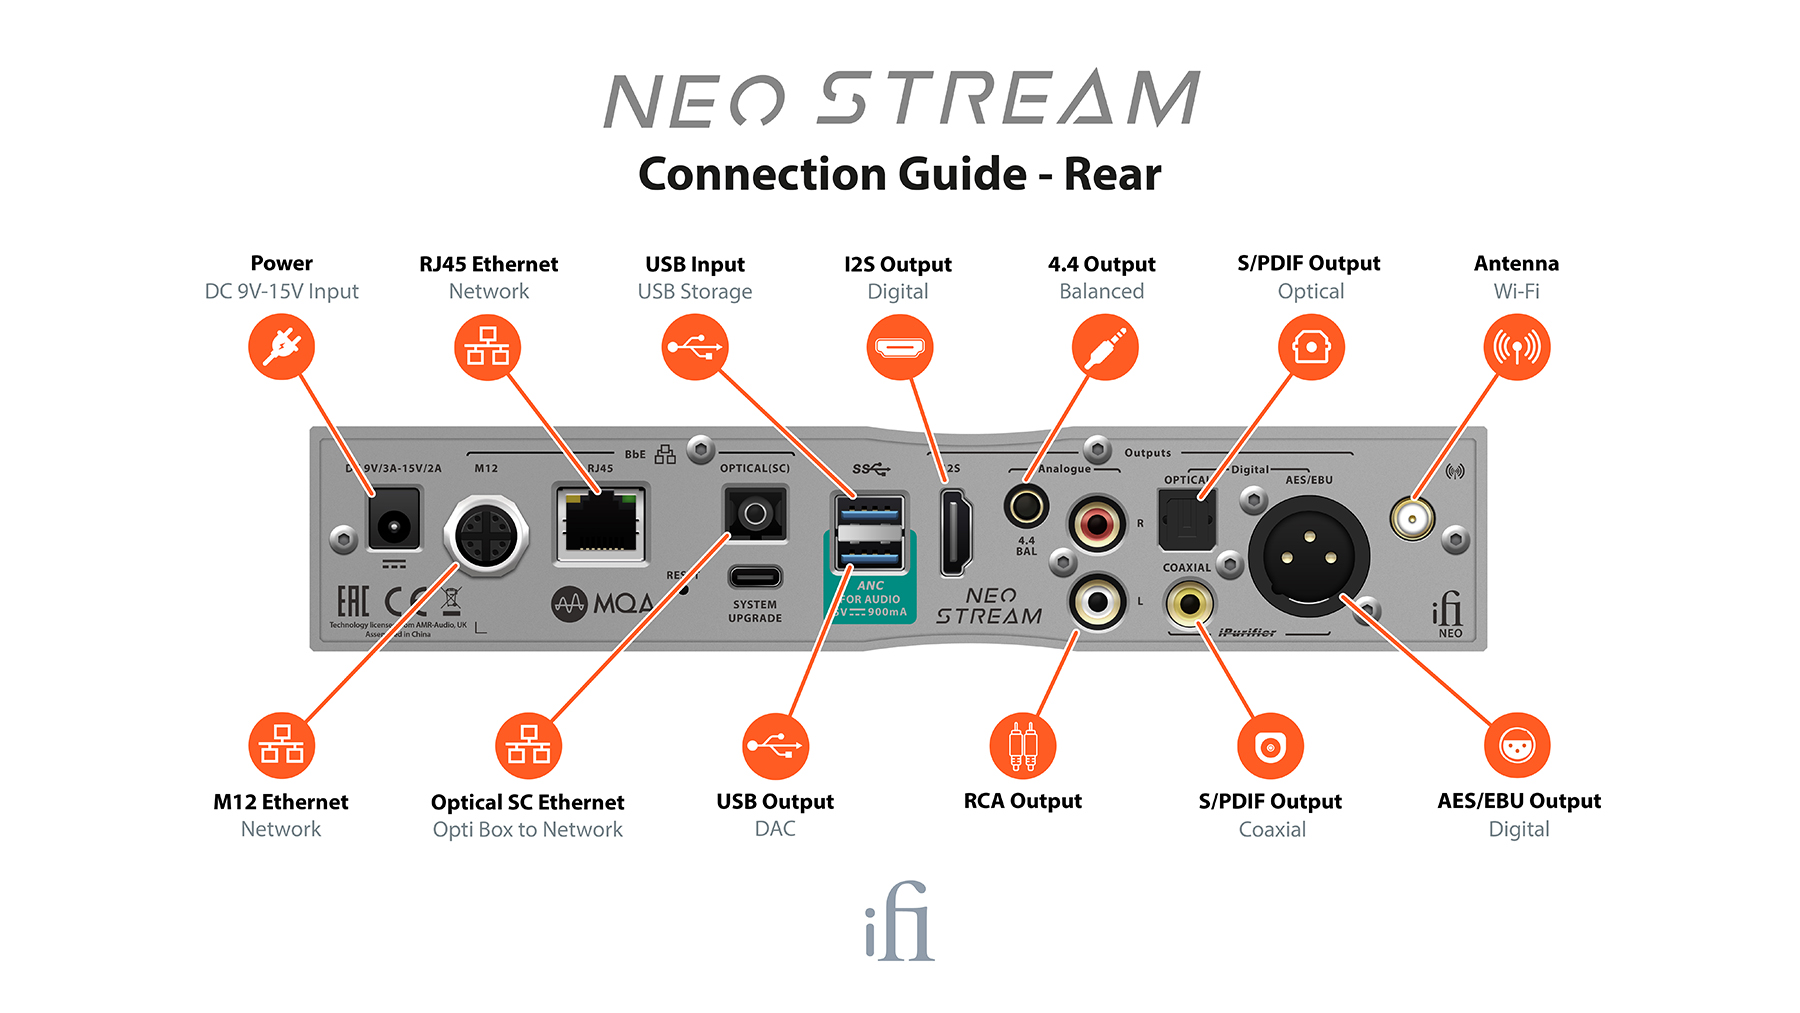 NEO-STREAM-Connection-Guide-rear_v1-02-2.jpeg